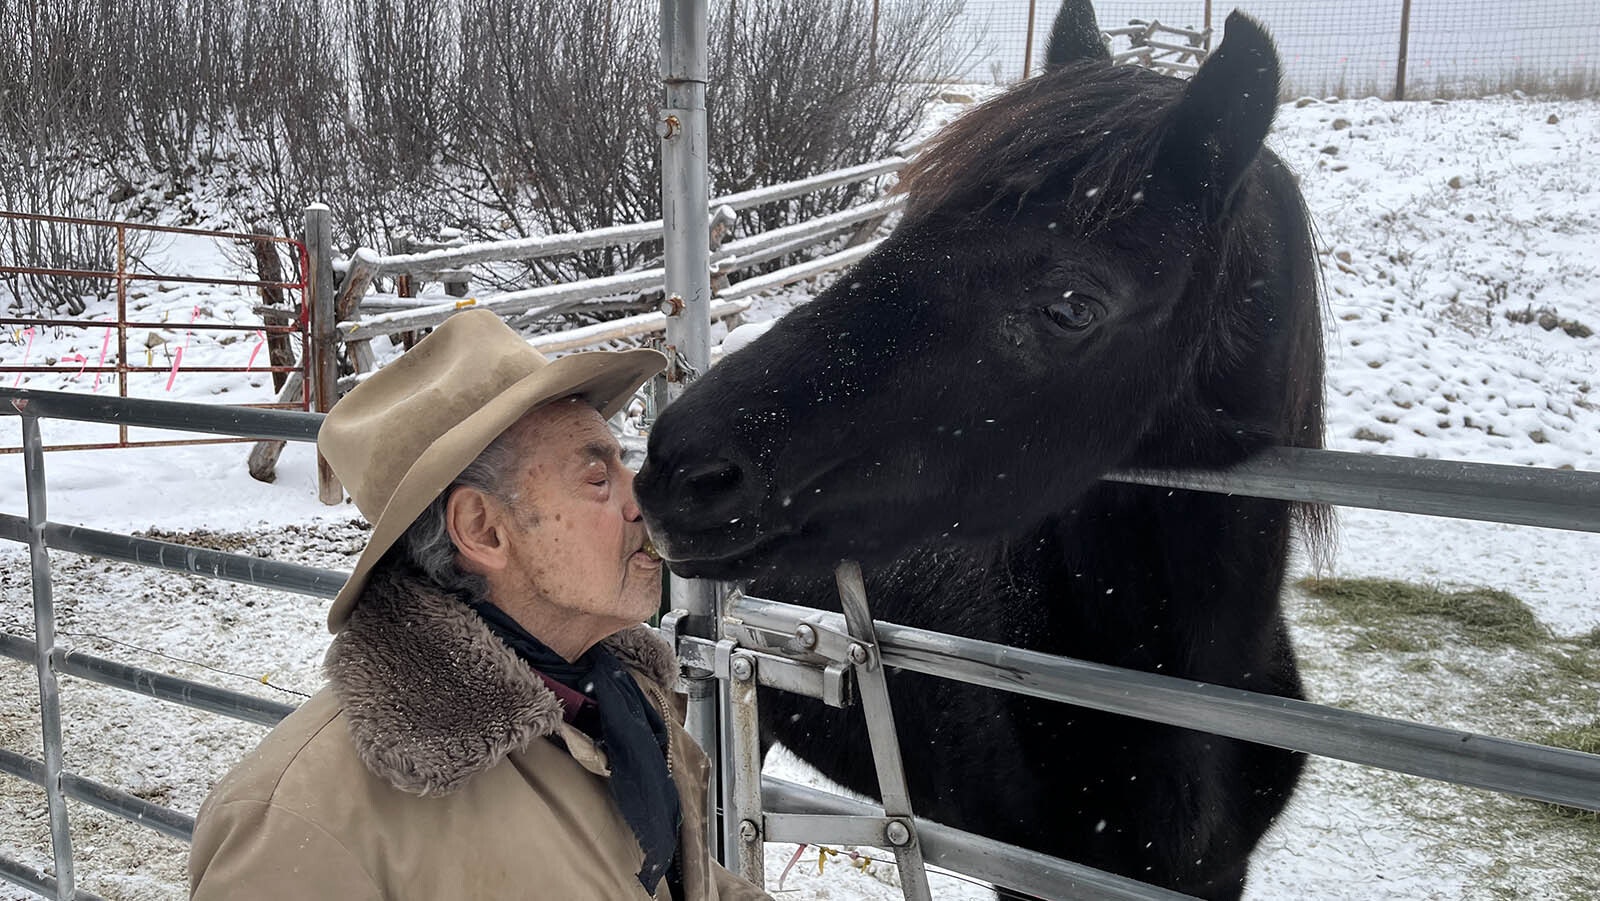 Gap allows his stallion Starless Knight to take a horse treat from between his teeth. “I wouldn’t recommend this with just any stallion,” he said, “but I raised him from birth. I was the first person he saw when he opened his eyes.”